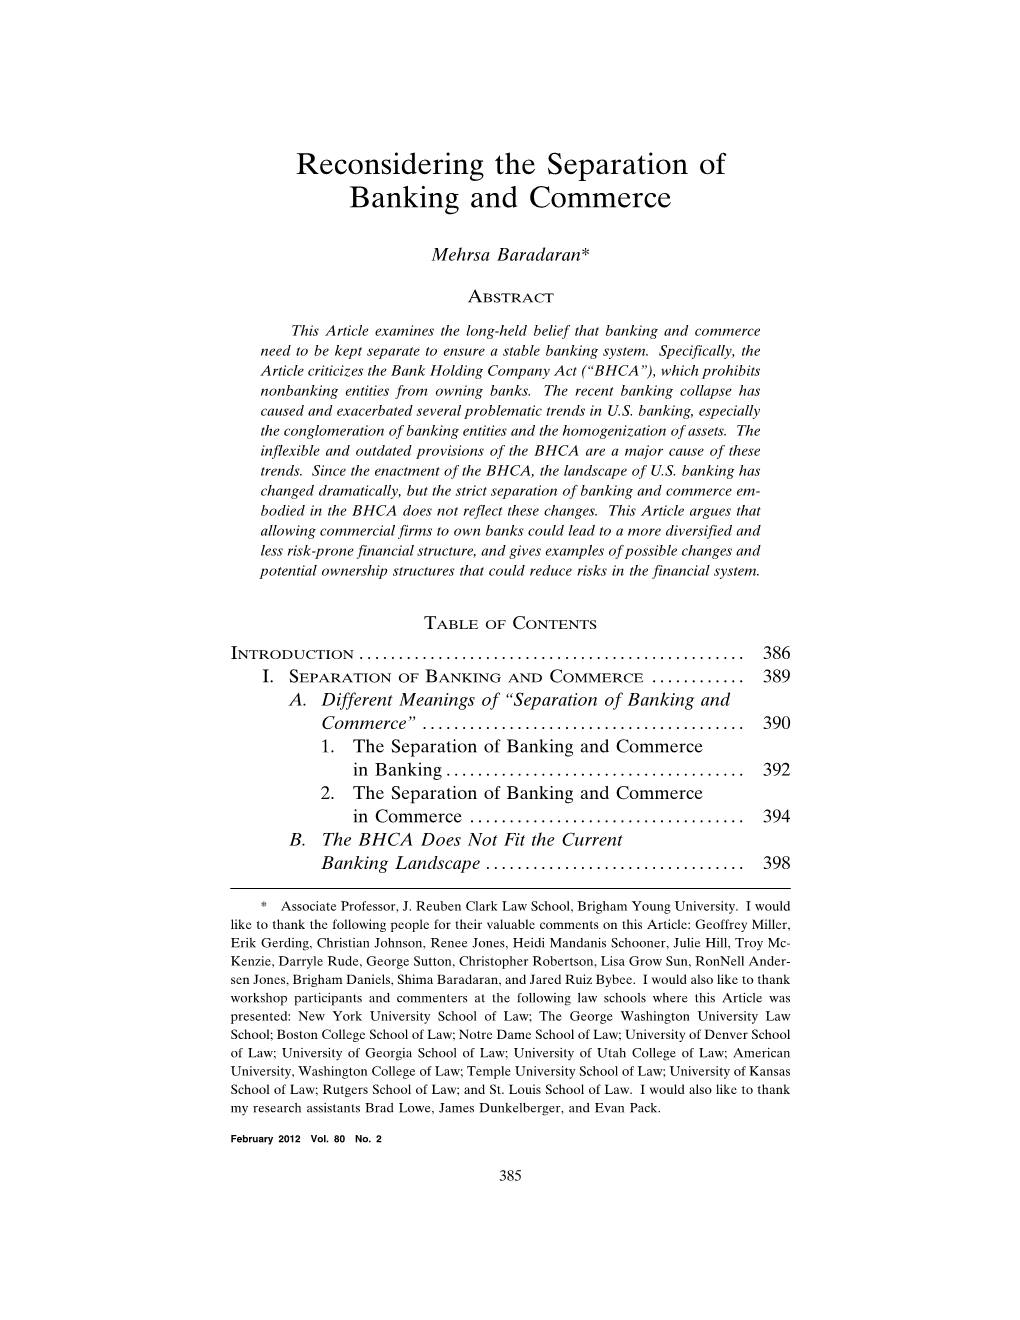 Reconsidering the Separation of Banking and Commerce